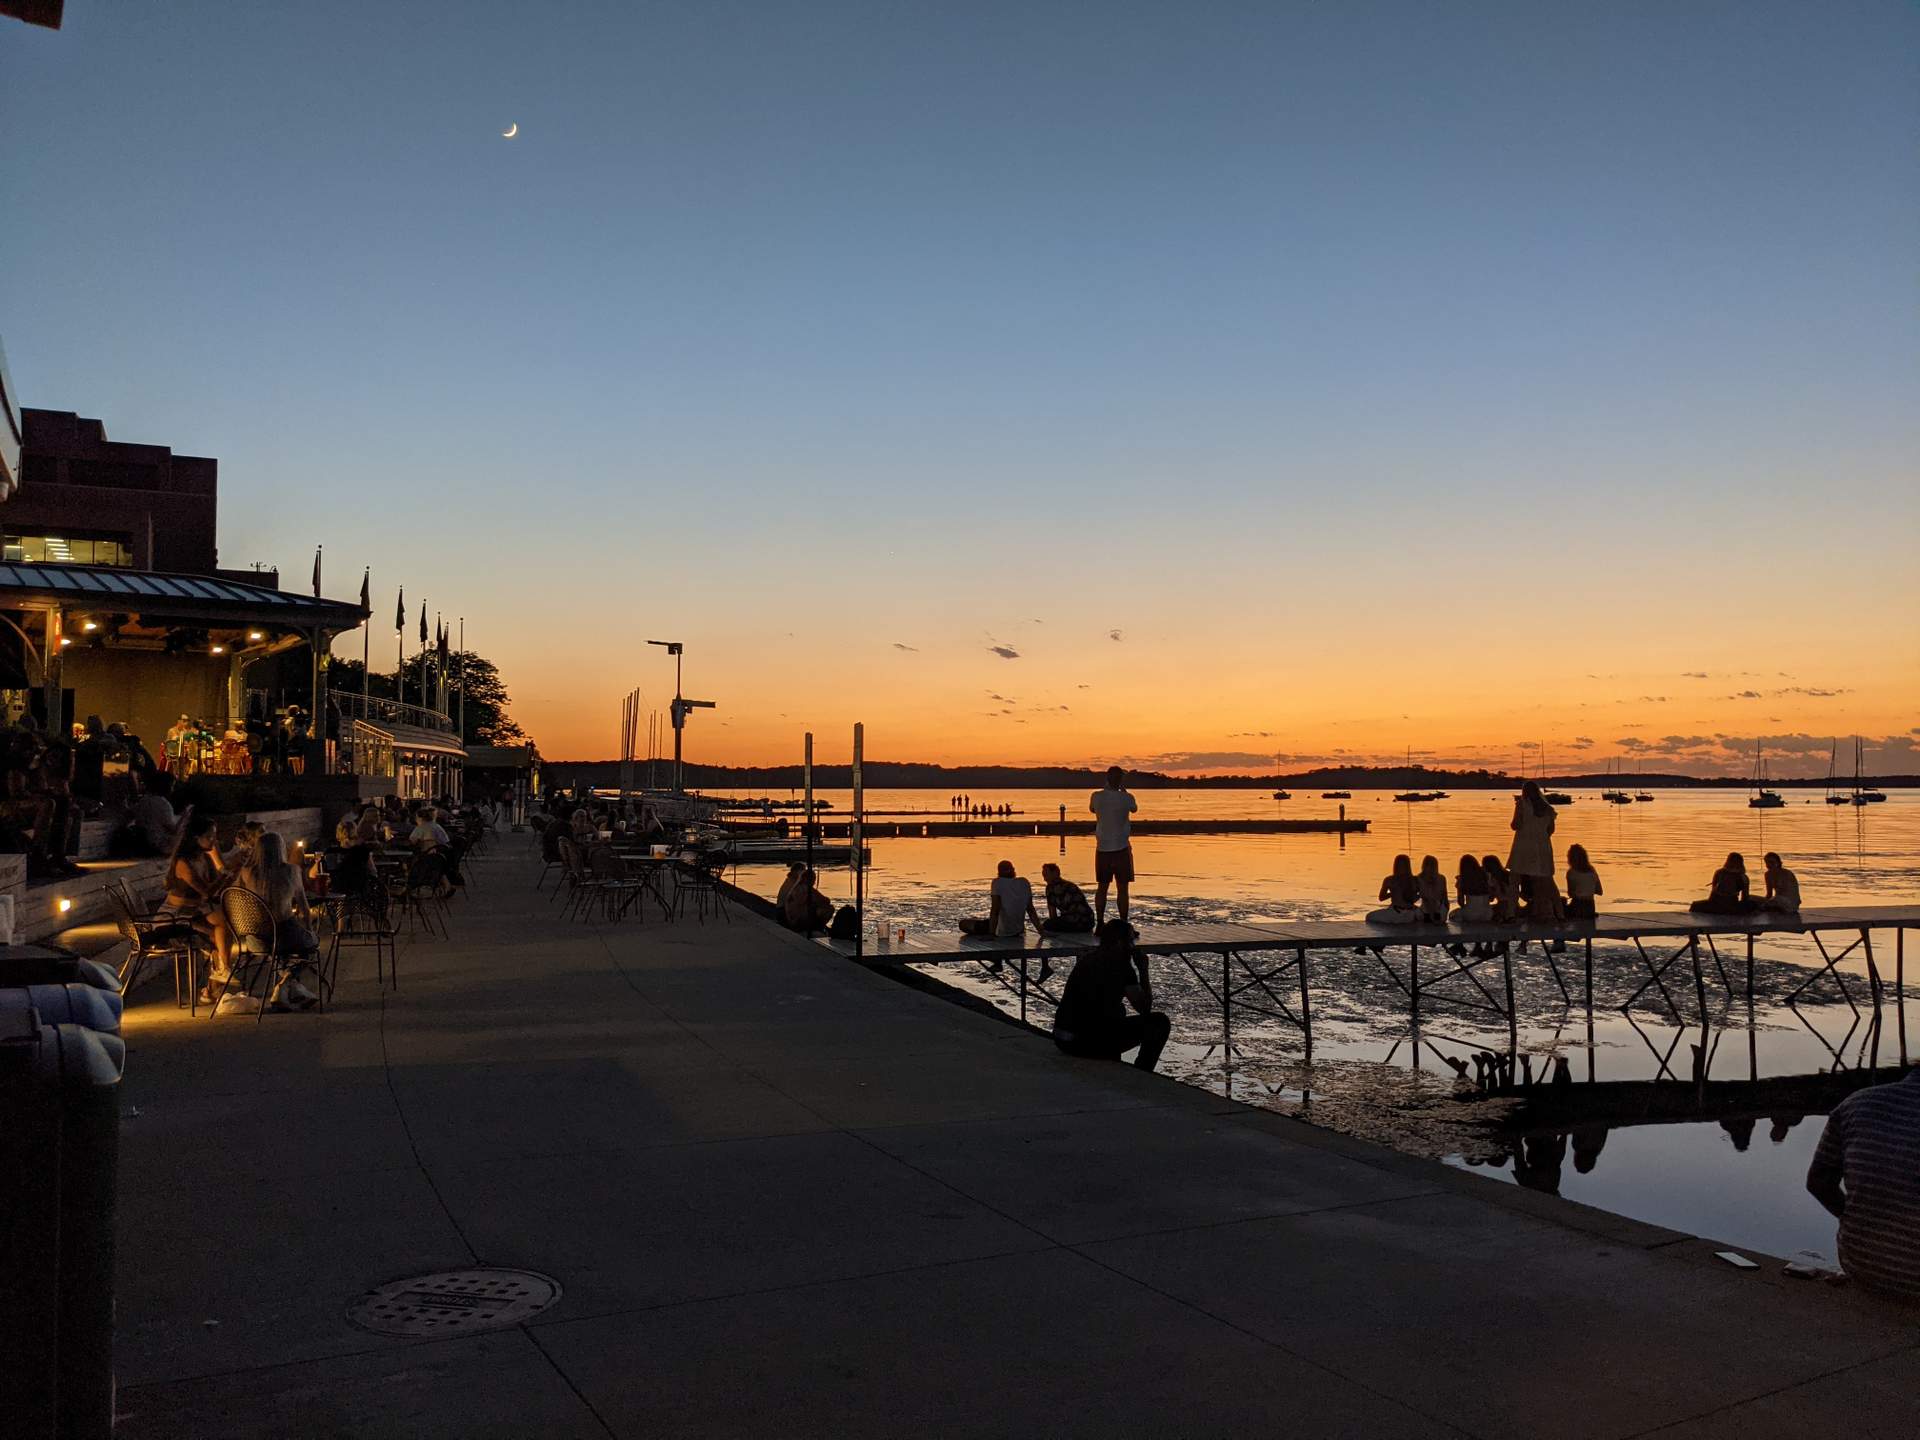 Watching a sunset outside of Memorial Union Terrace at the University of Wisconsin in Madison.